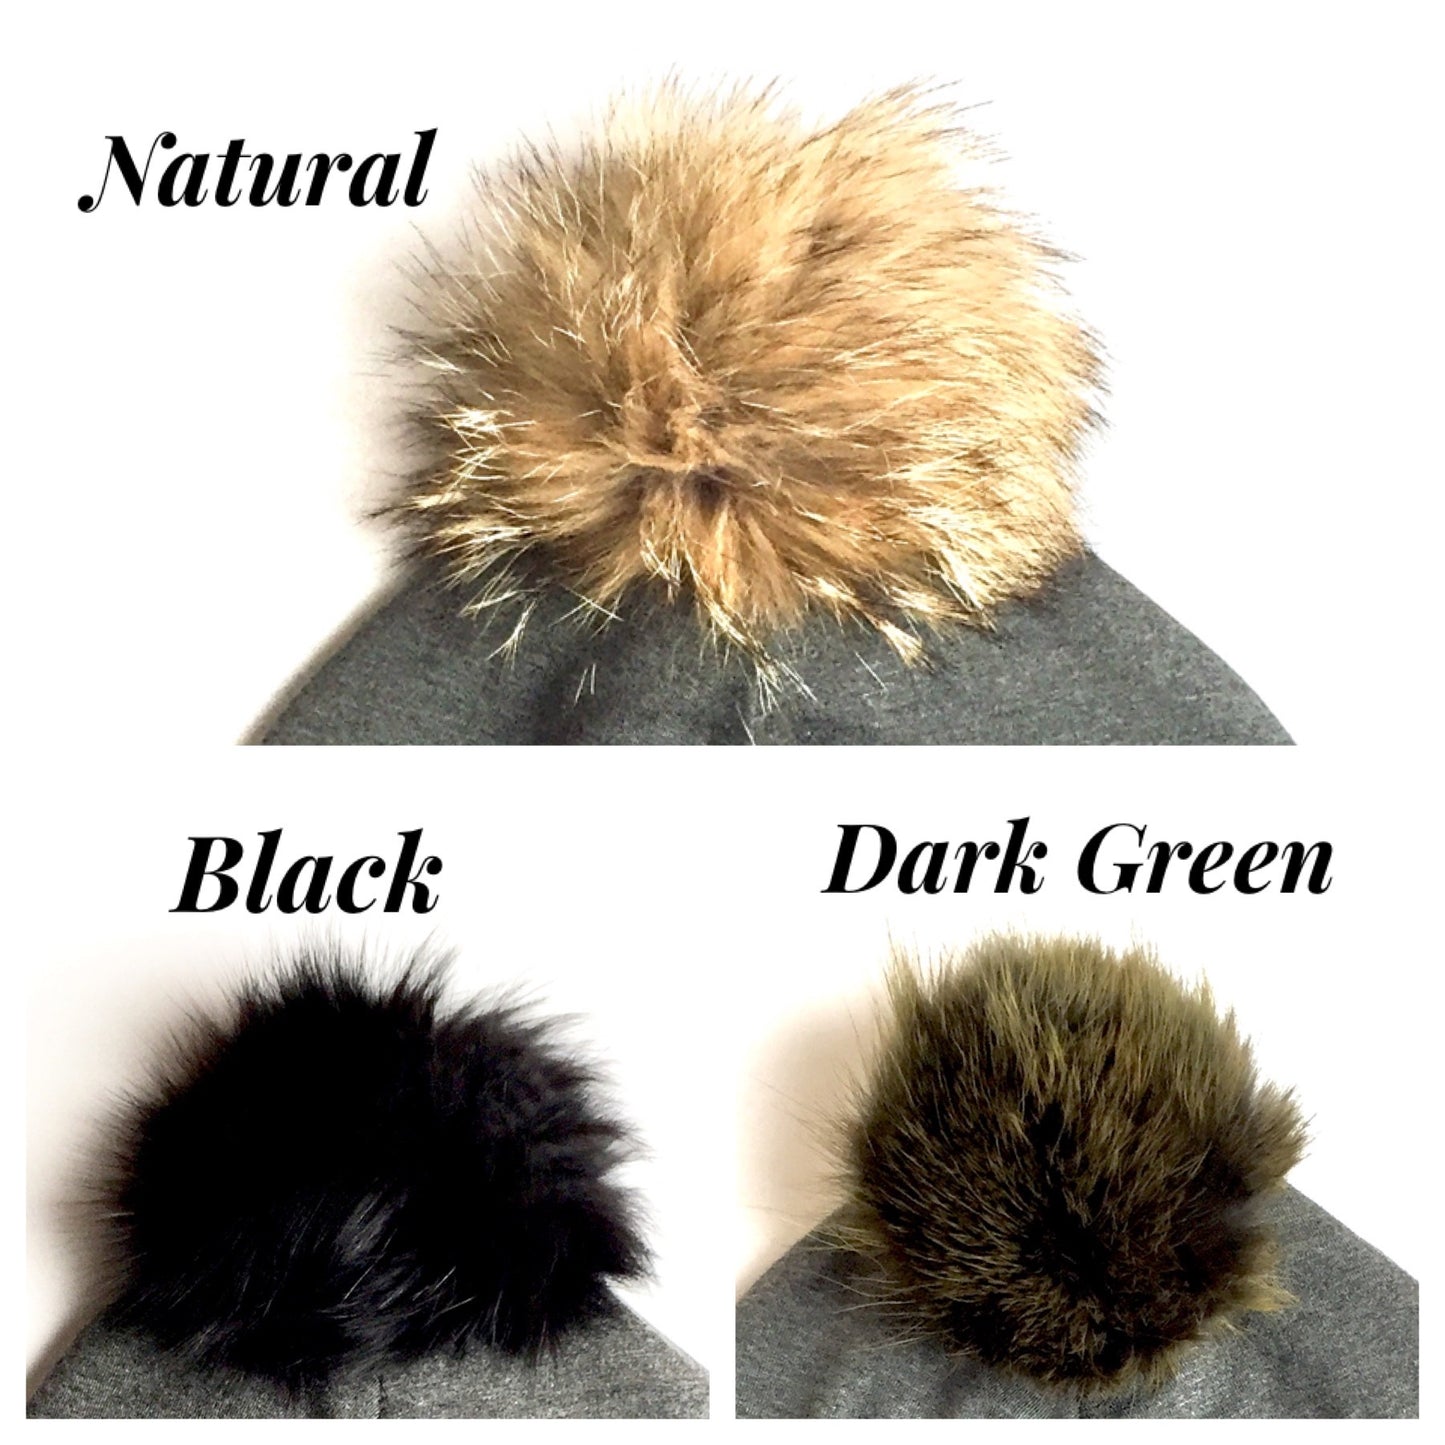 Colorful Winter Bamboo Hat + recycled fur pompom